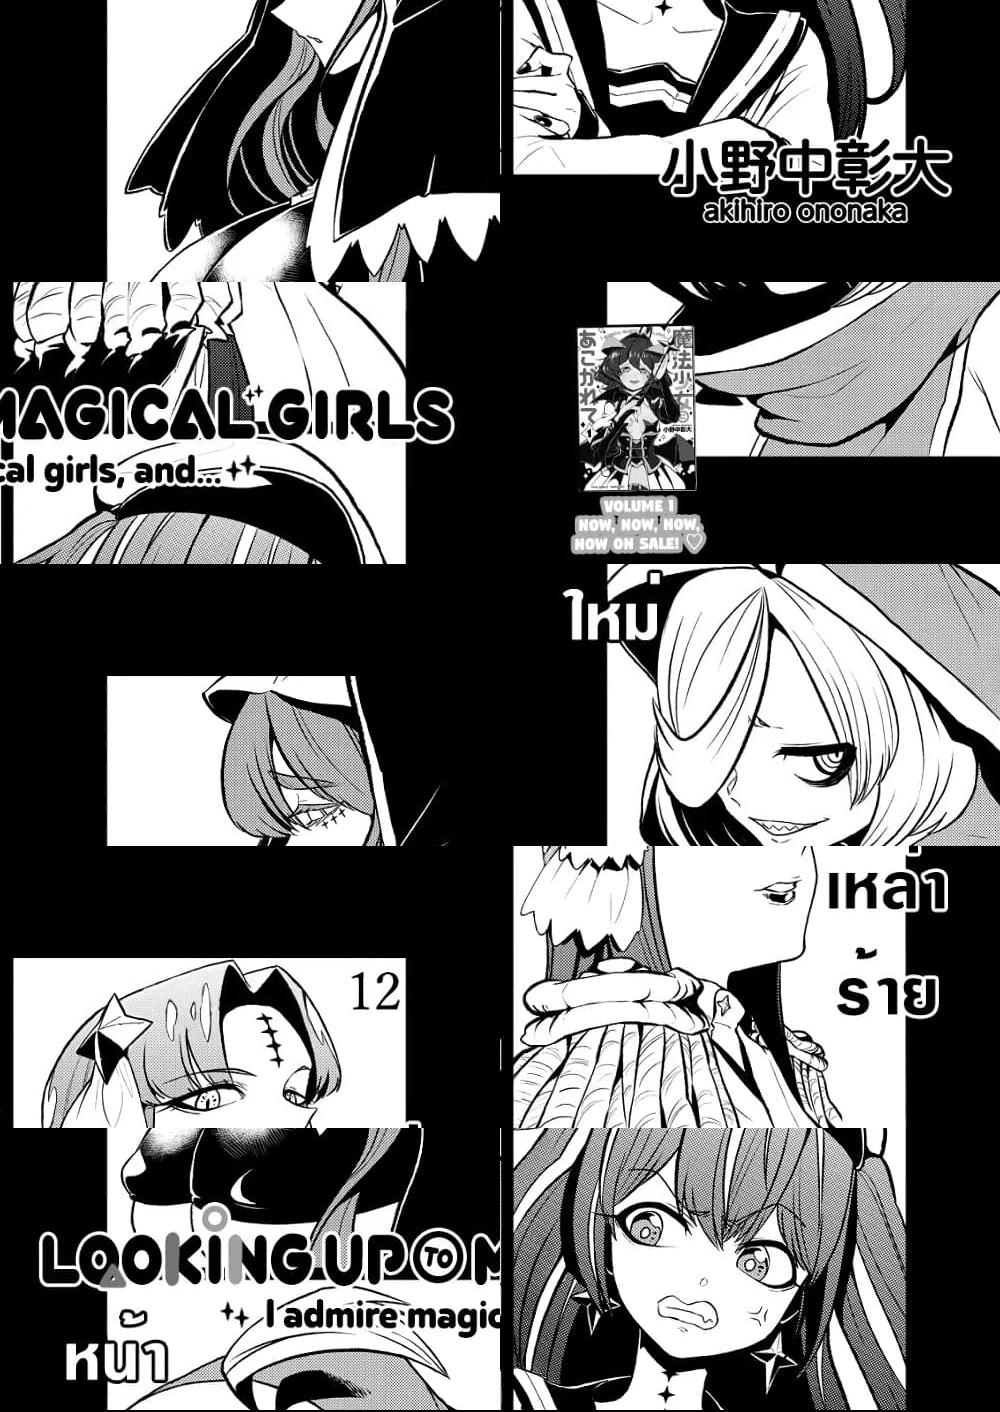 Looking up to Magical Girls - 12 - 2